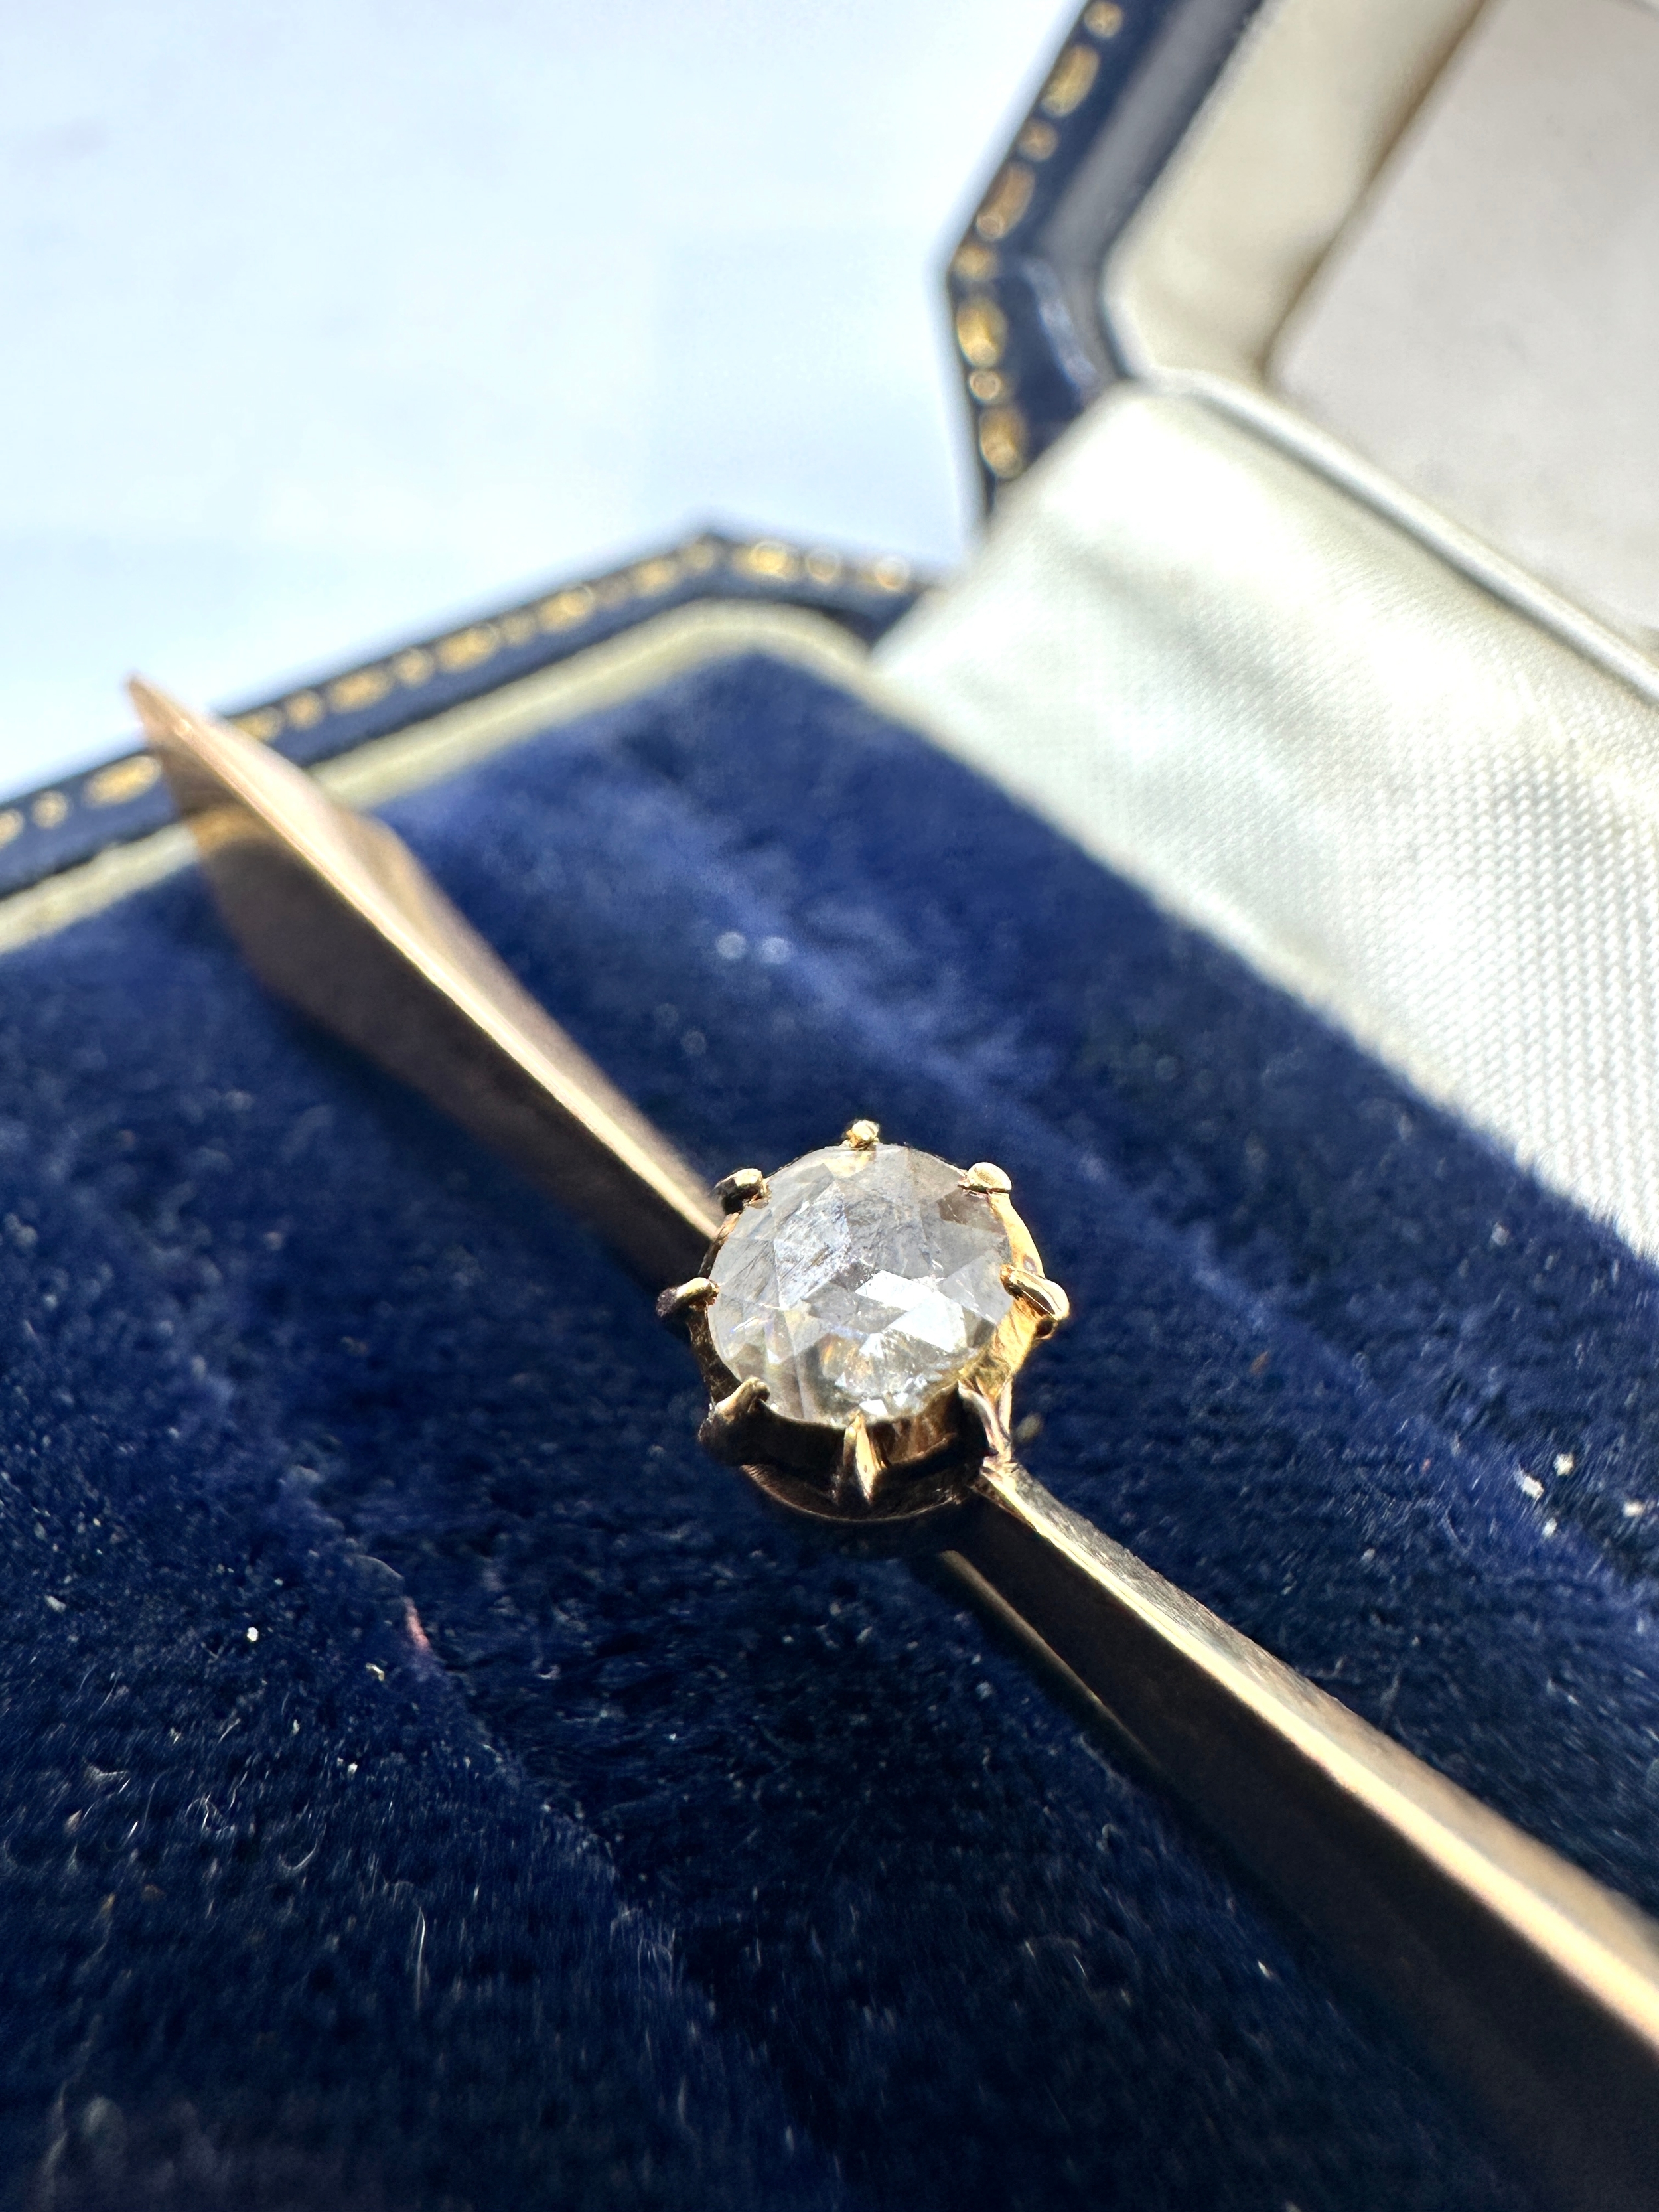 Antique 14ct gold old cut diamond ring set with central diamond that measures approx 4mm diameter - Image 3 of 6